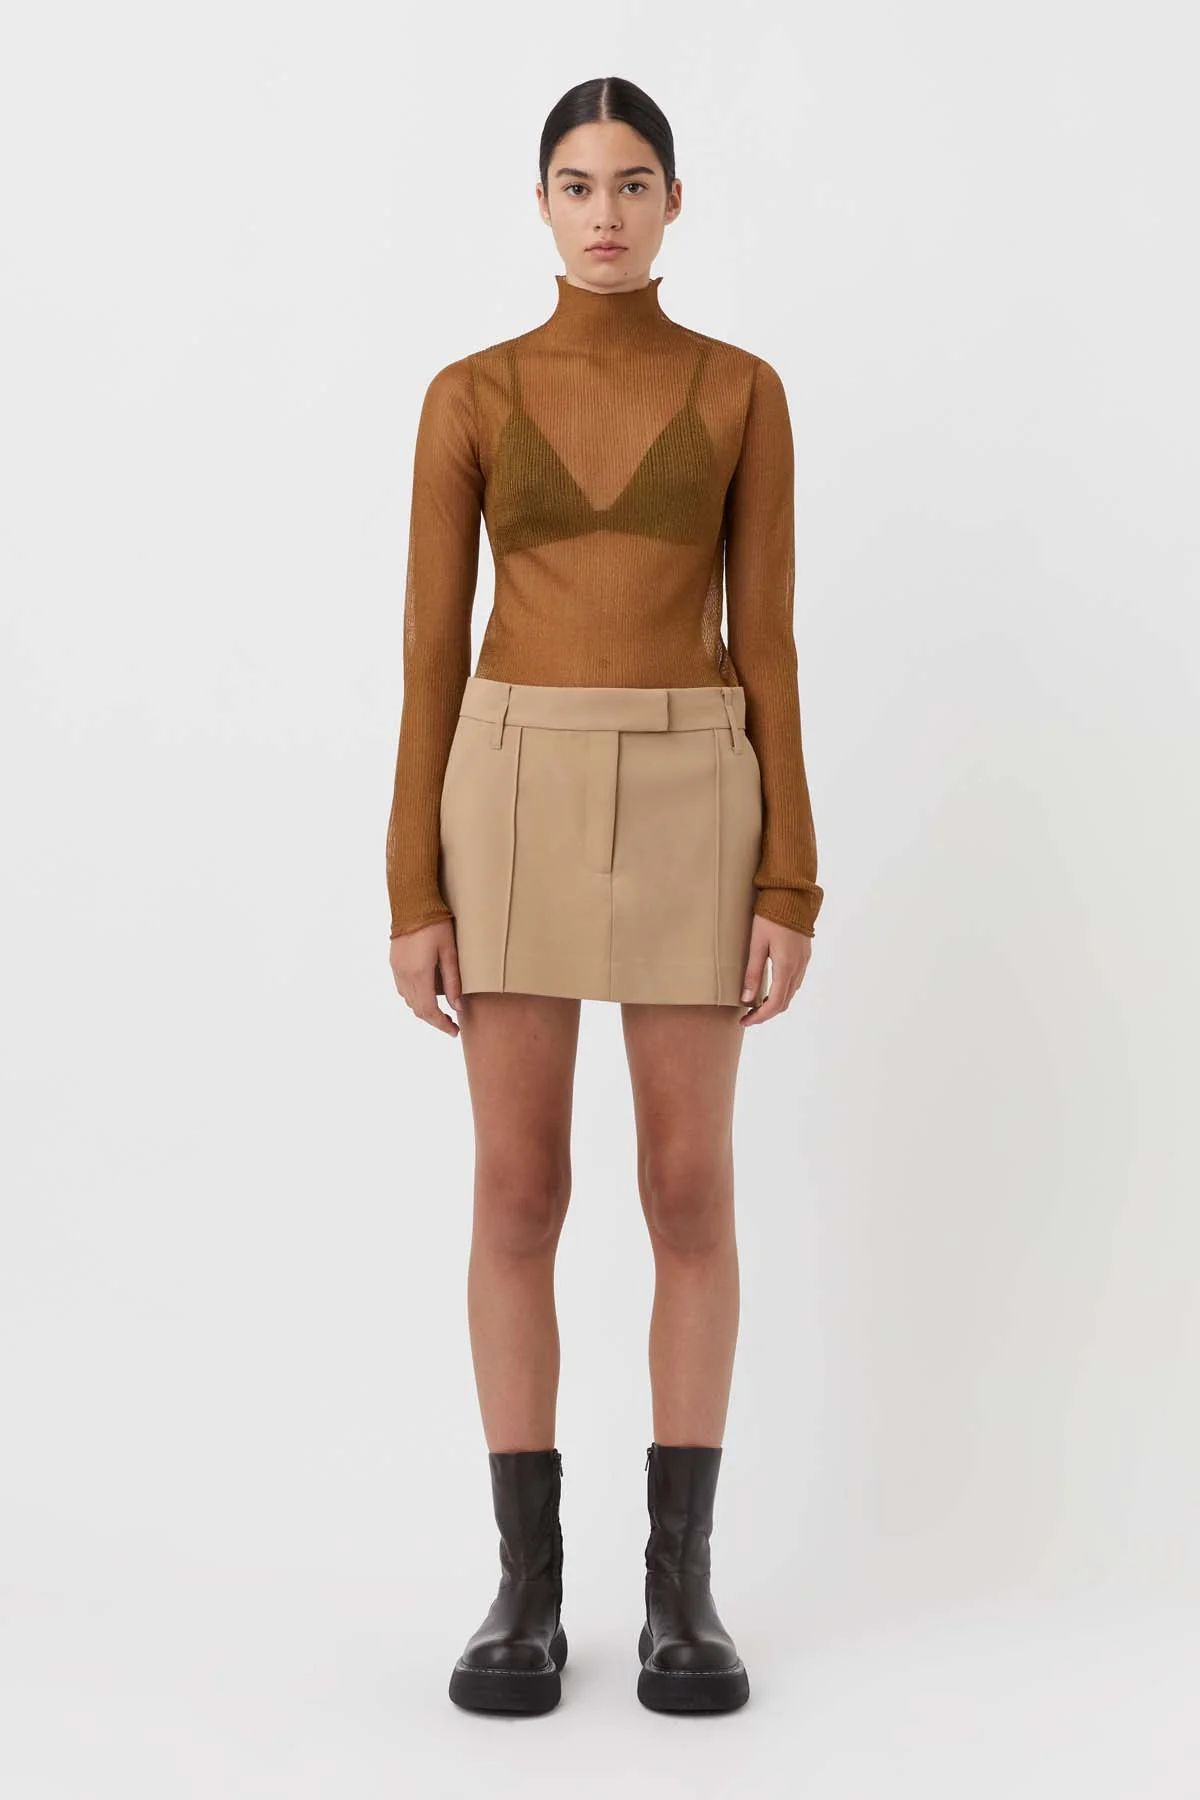 Jade Lurex Knit Top | Camilla and Marc